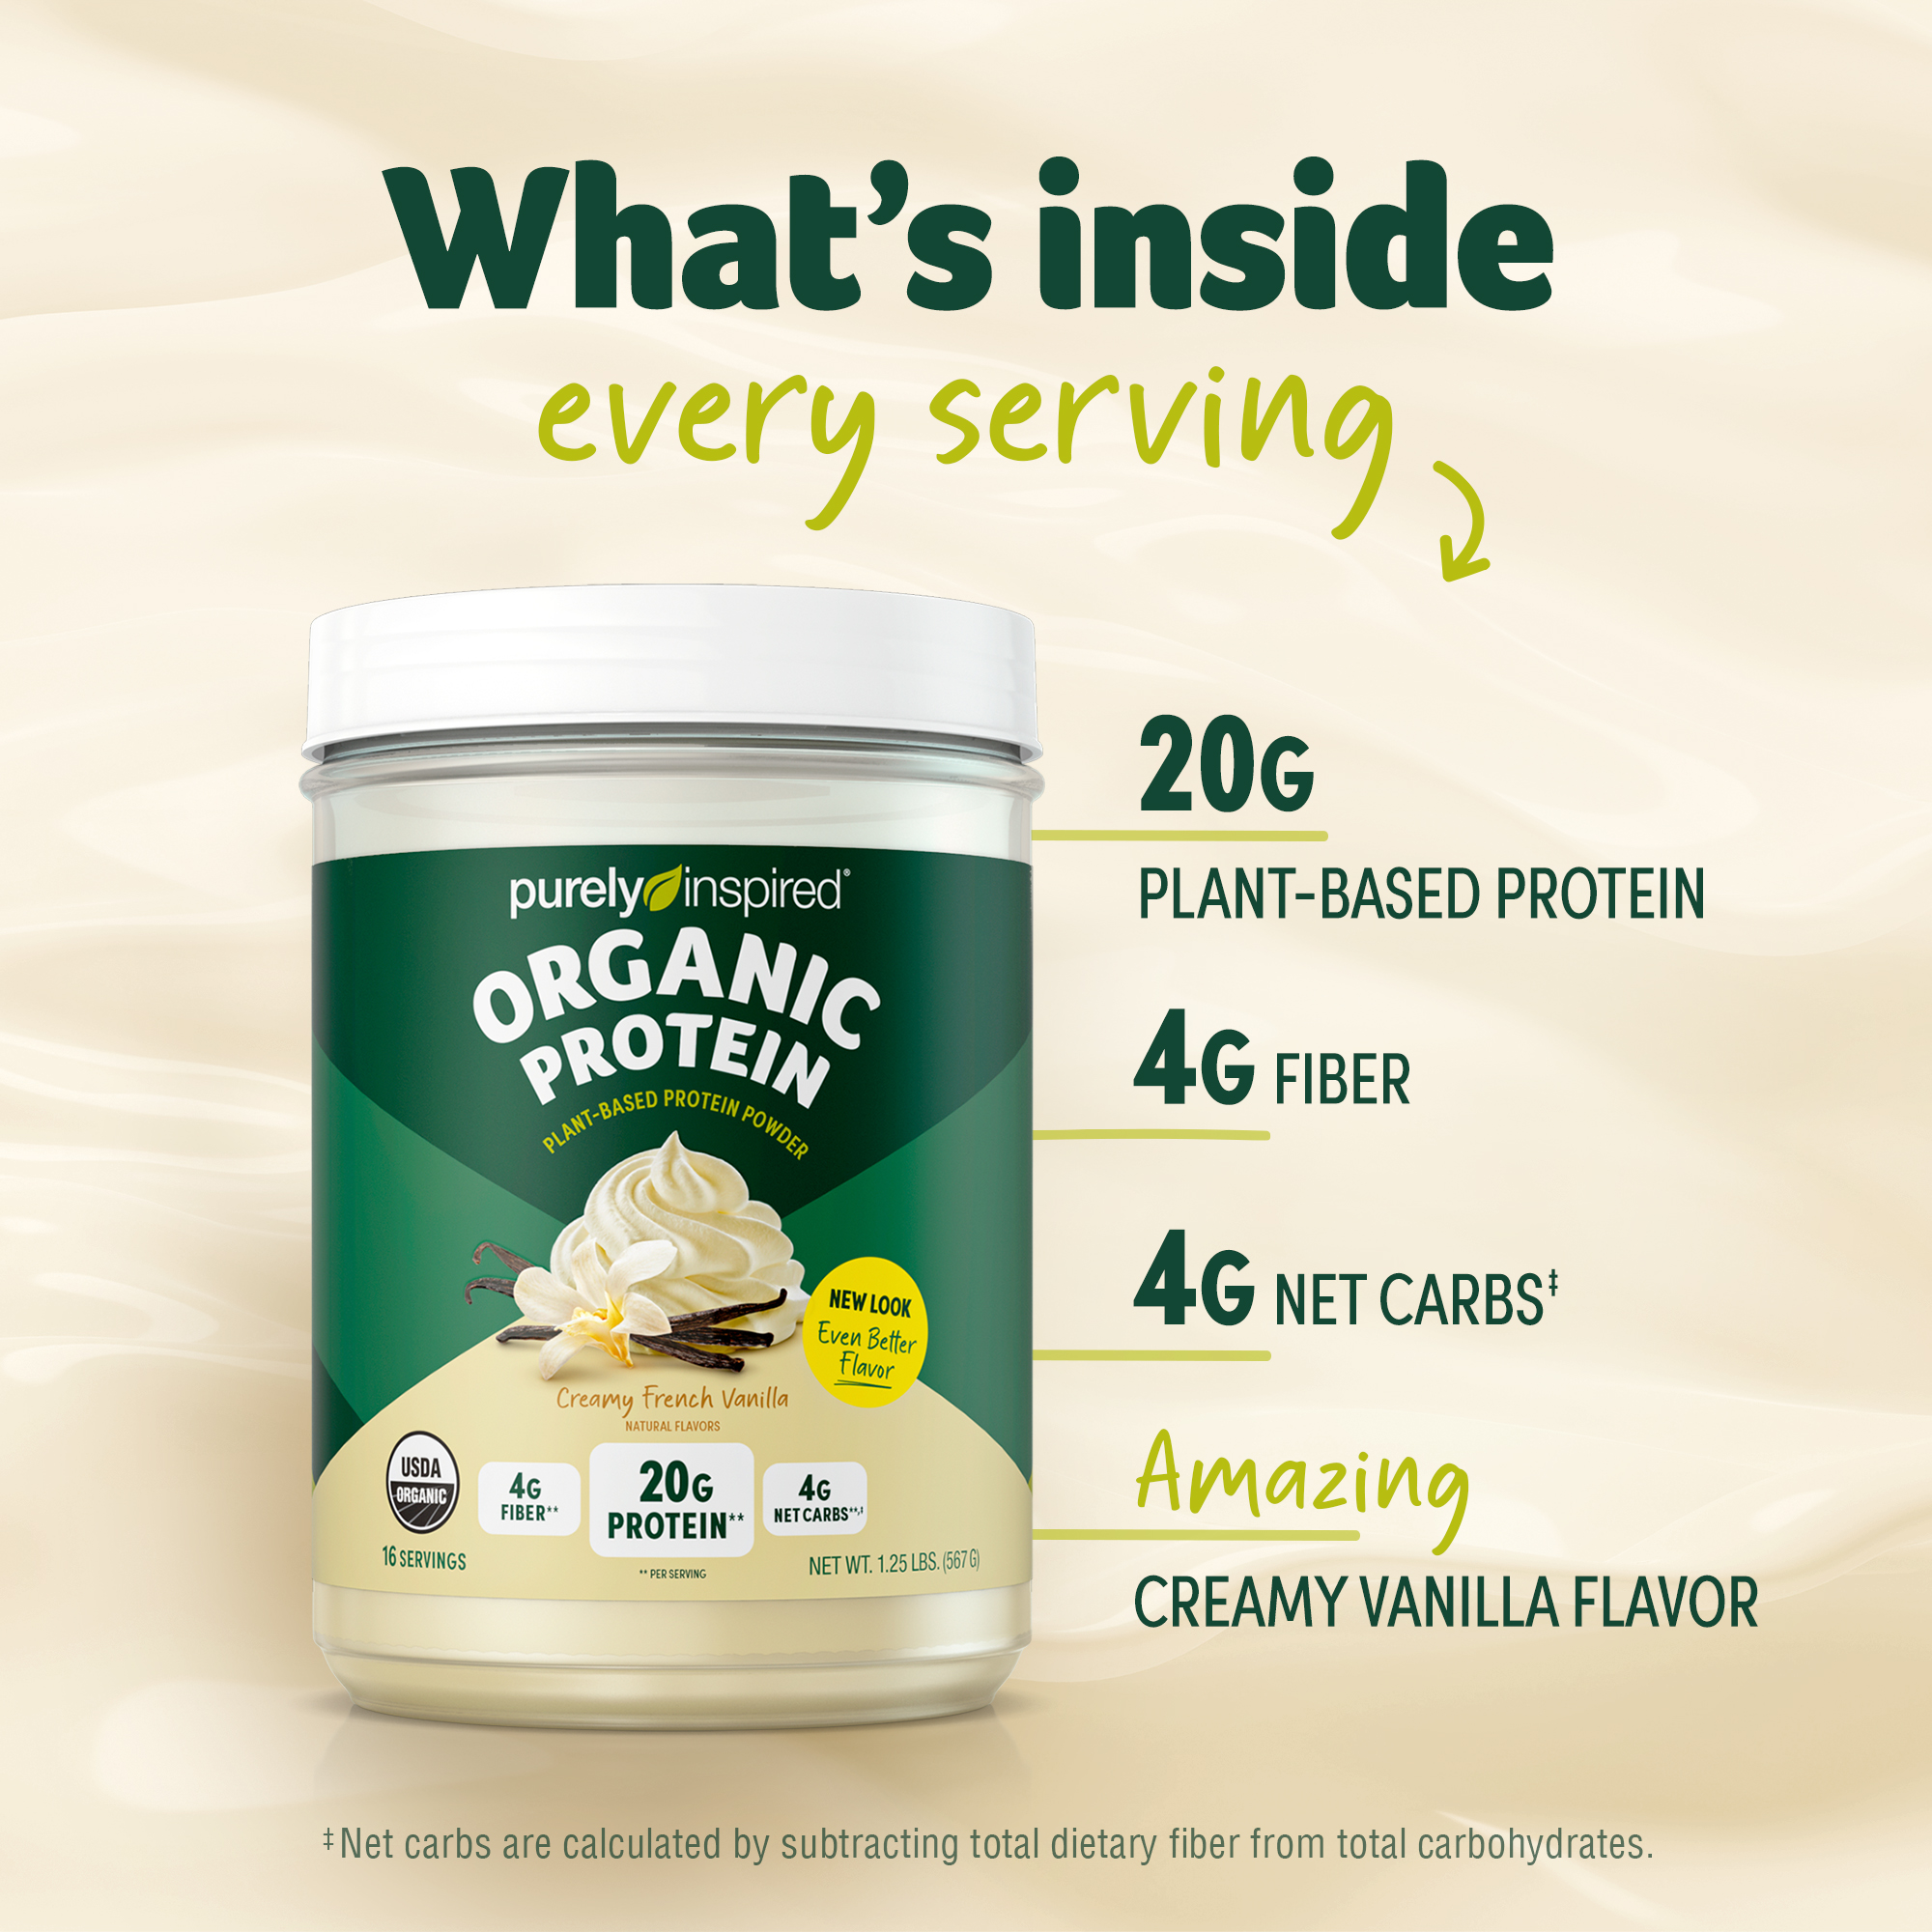 Purely Inspired Organic Plant-Based Protein Powder, Vanilla, 20g Protein, 1.25 lbs, 16 Servings - image 3 of 10